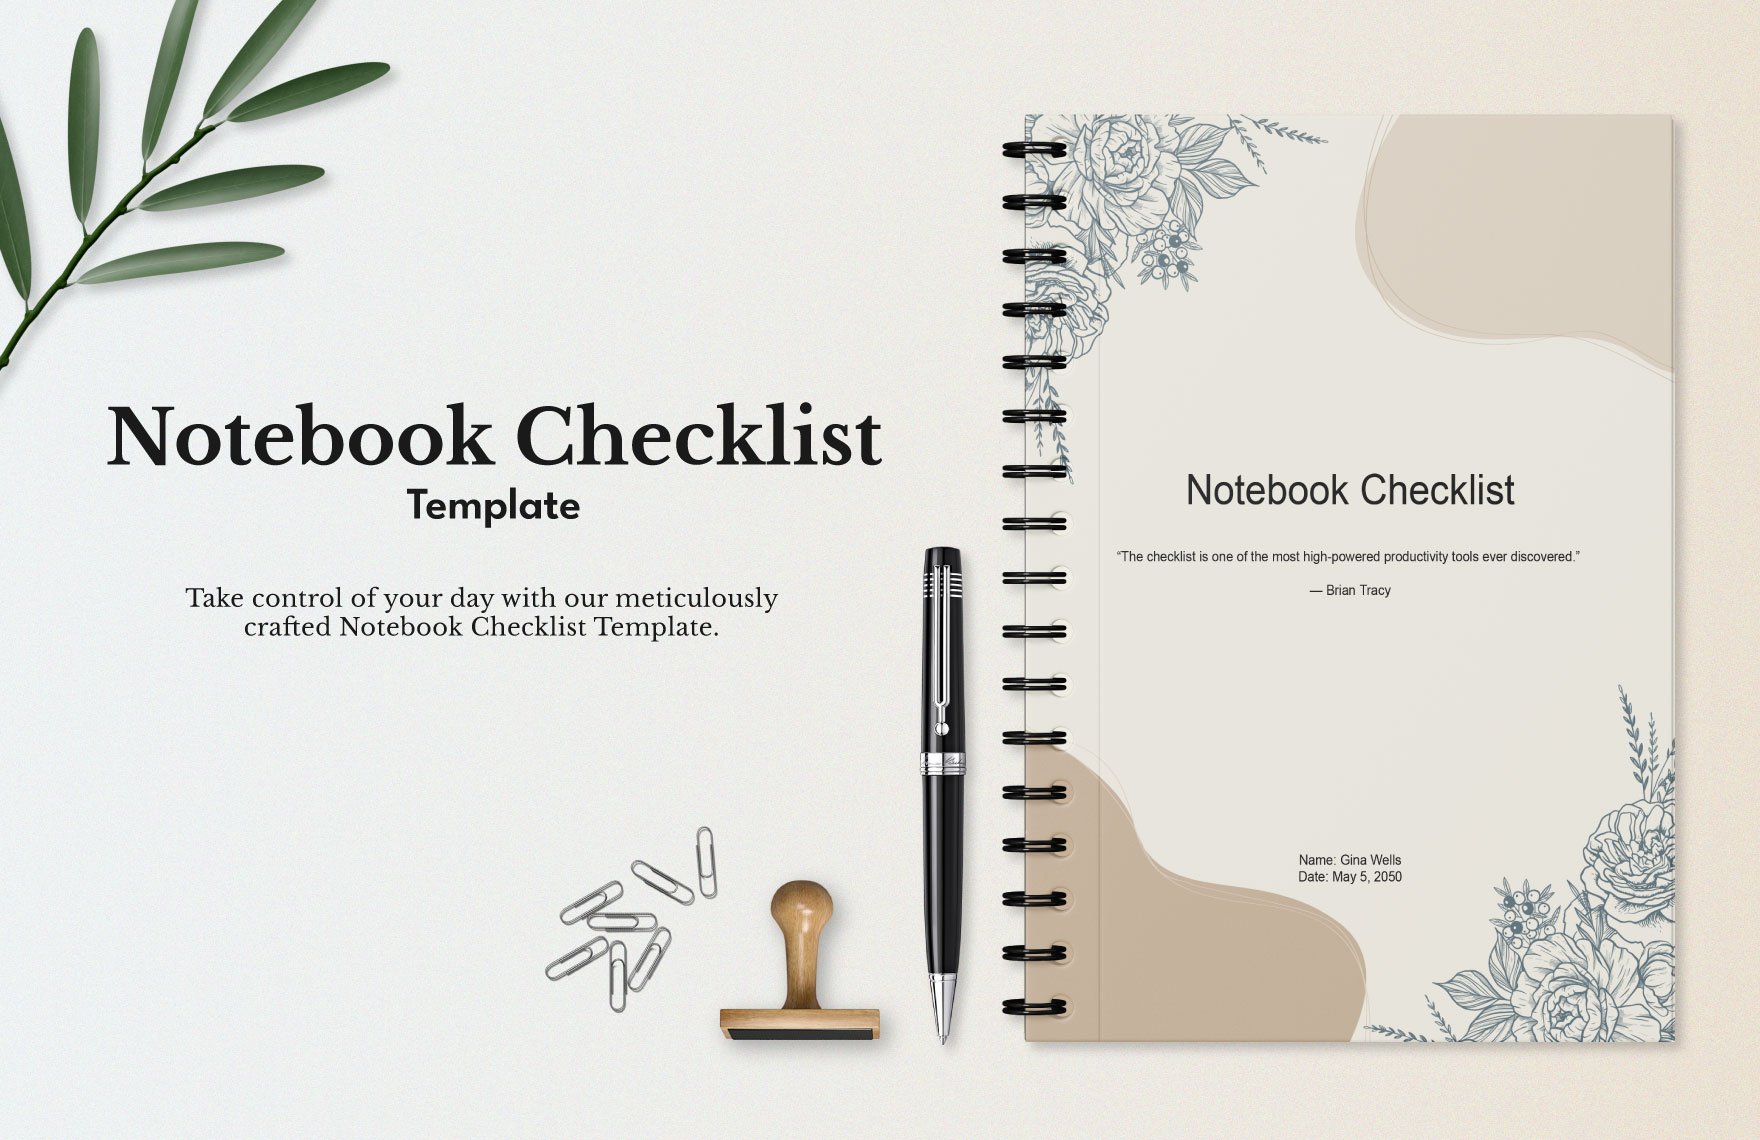 Free Notebook Checklist Template in Word, Google Docs, PDF